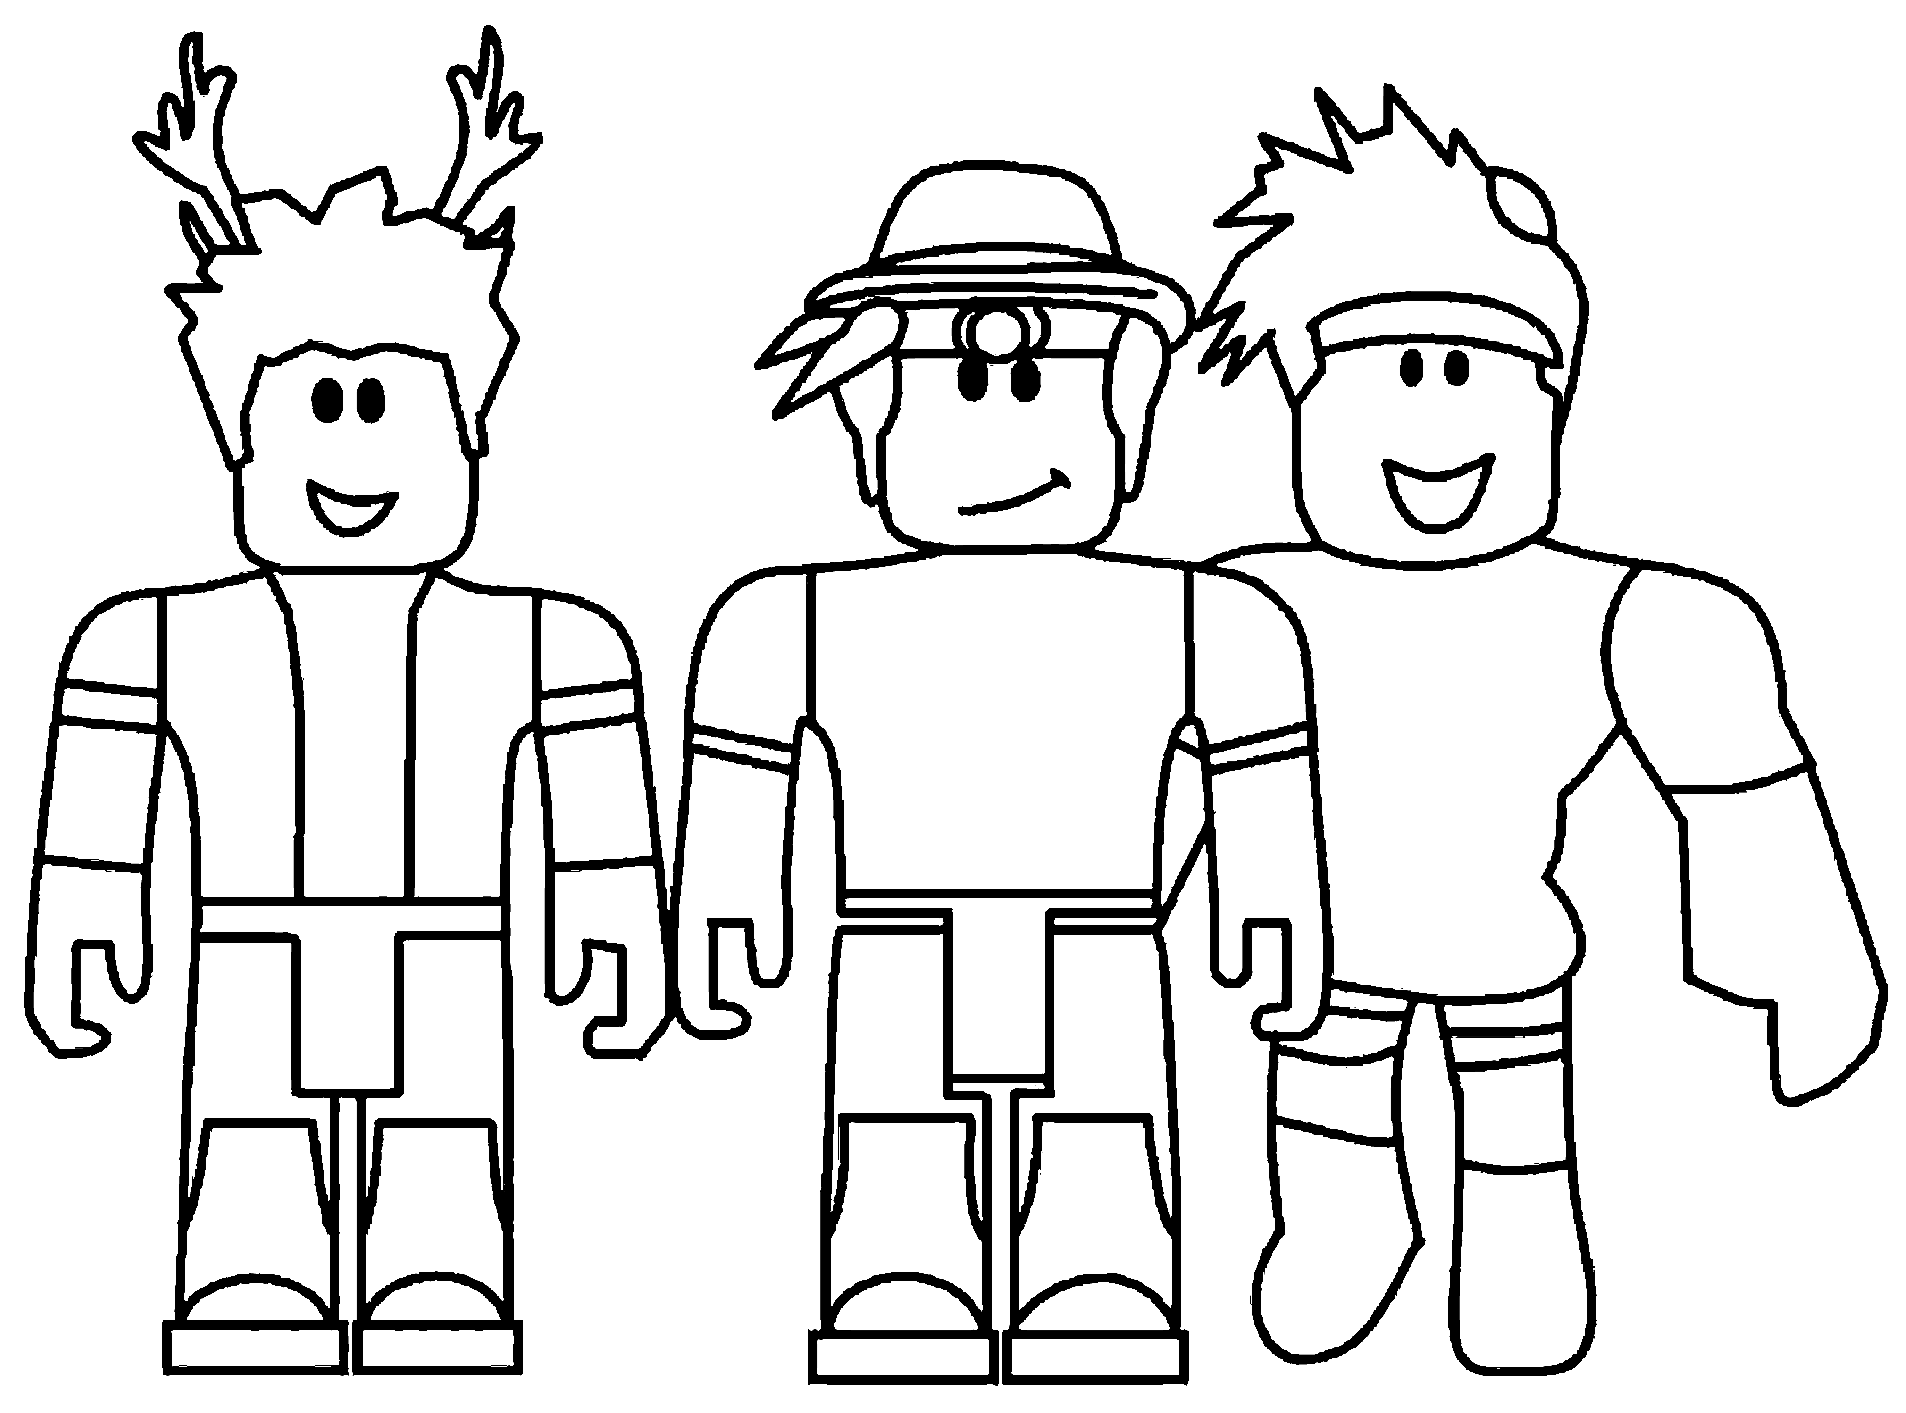 Roblox characters smiling Coloring Page